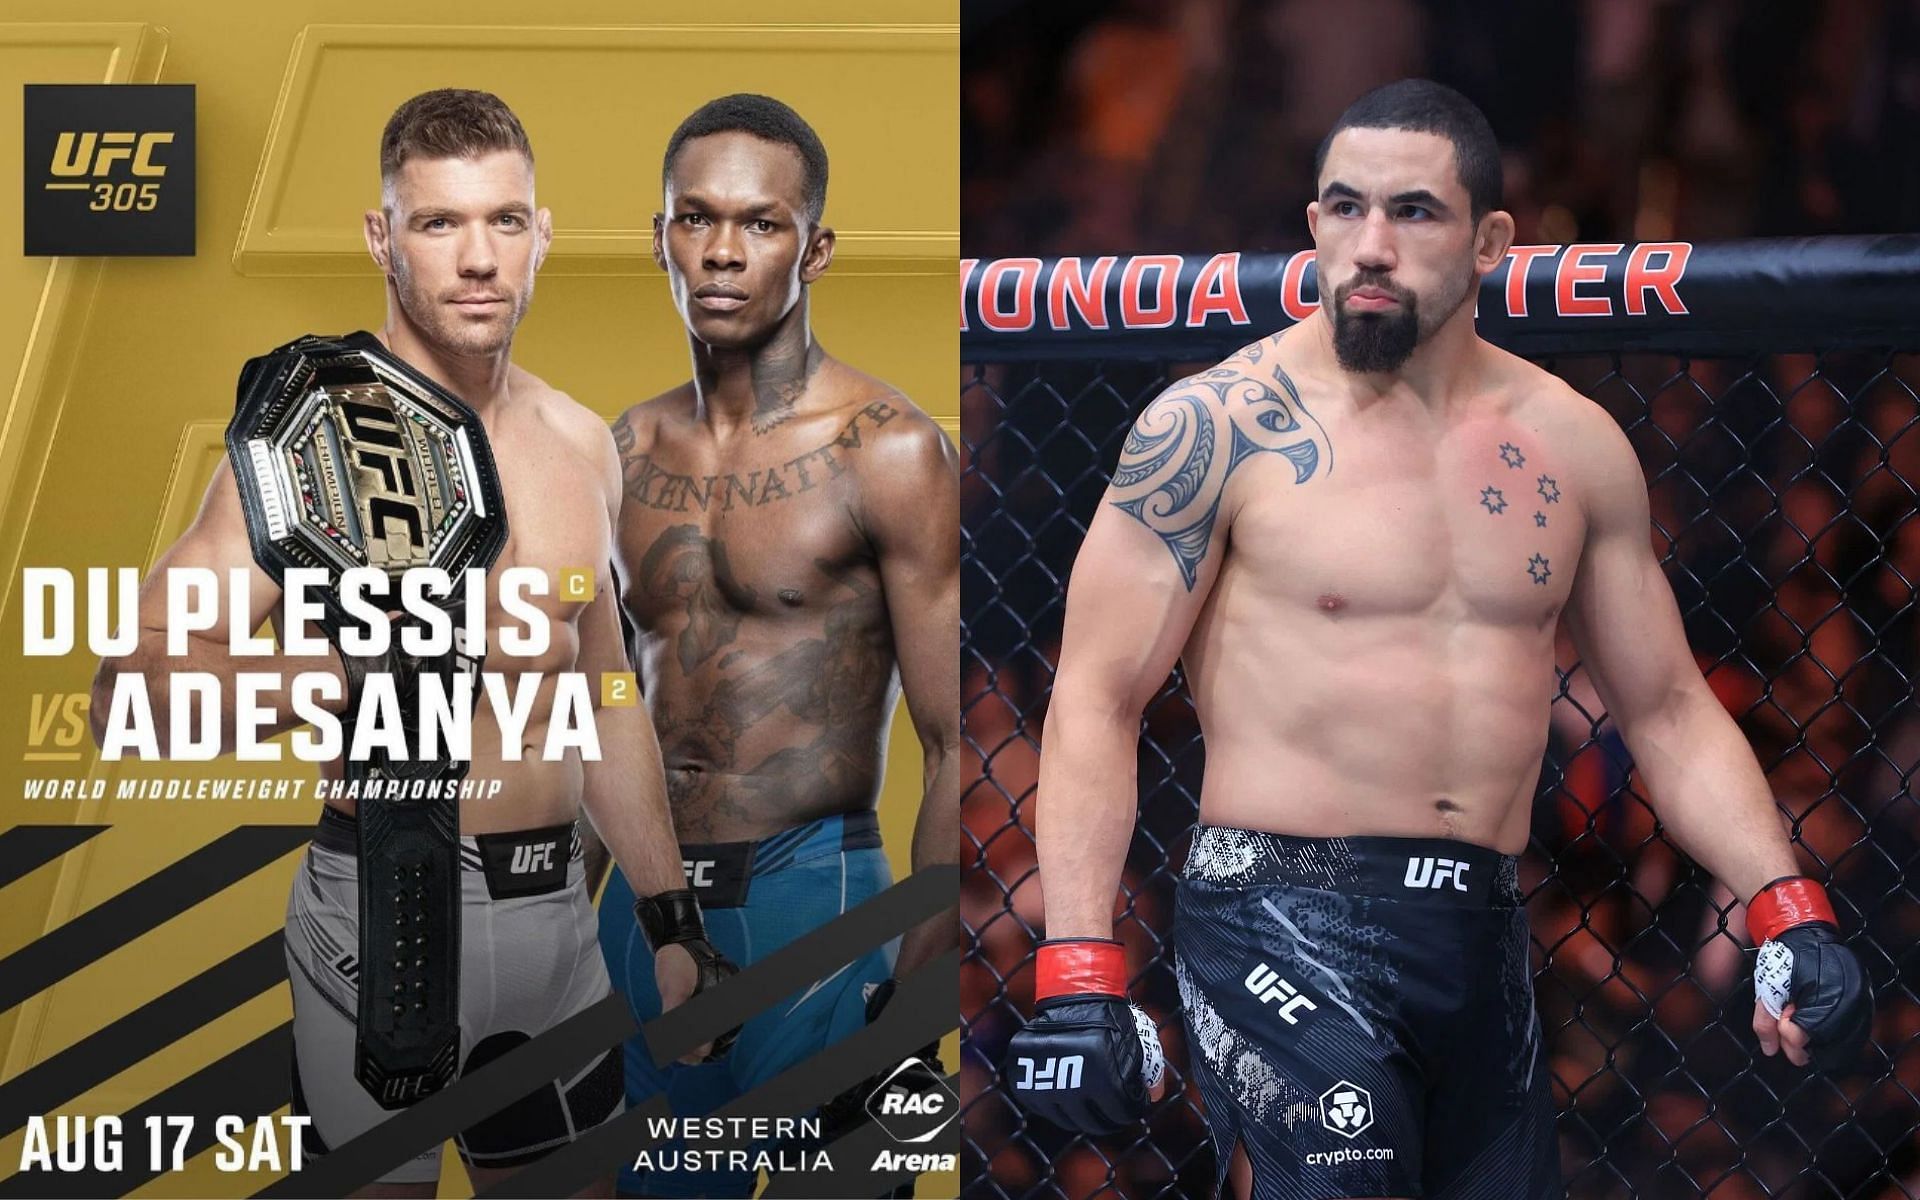 Robert Whittaker (right) could serve as back-up for Dricus du Plessis vs. Israel Adesanya (left) according to Dana White [Images courtesy: Getty Images and @dricusduplessis on Instagram]